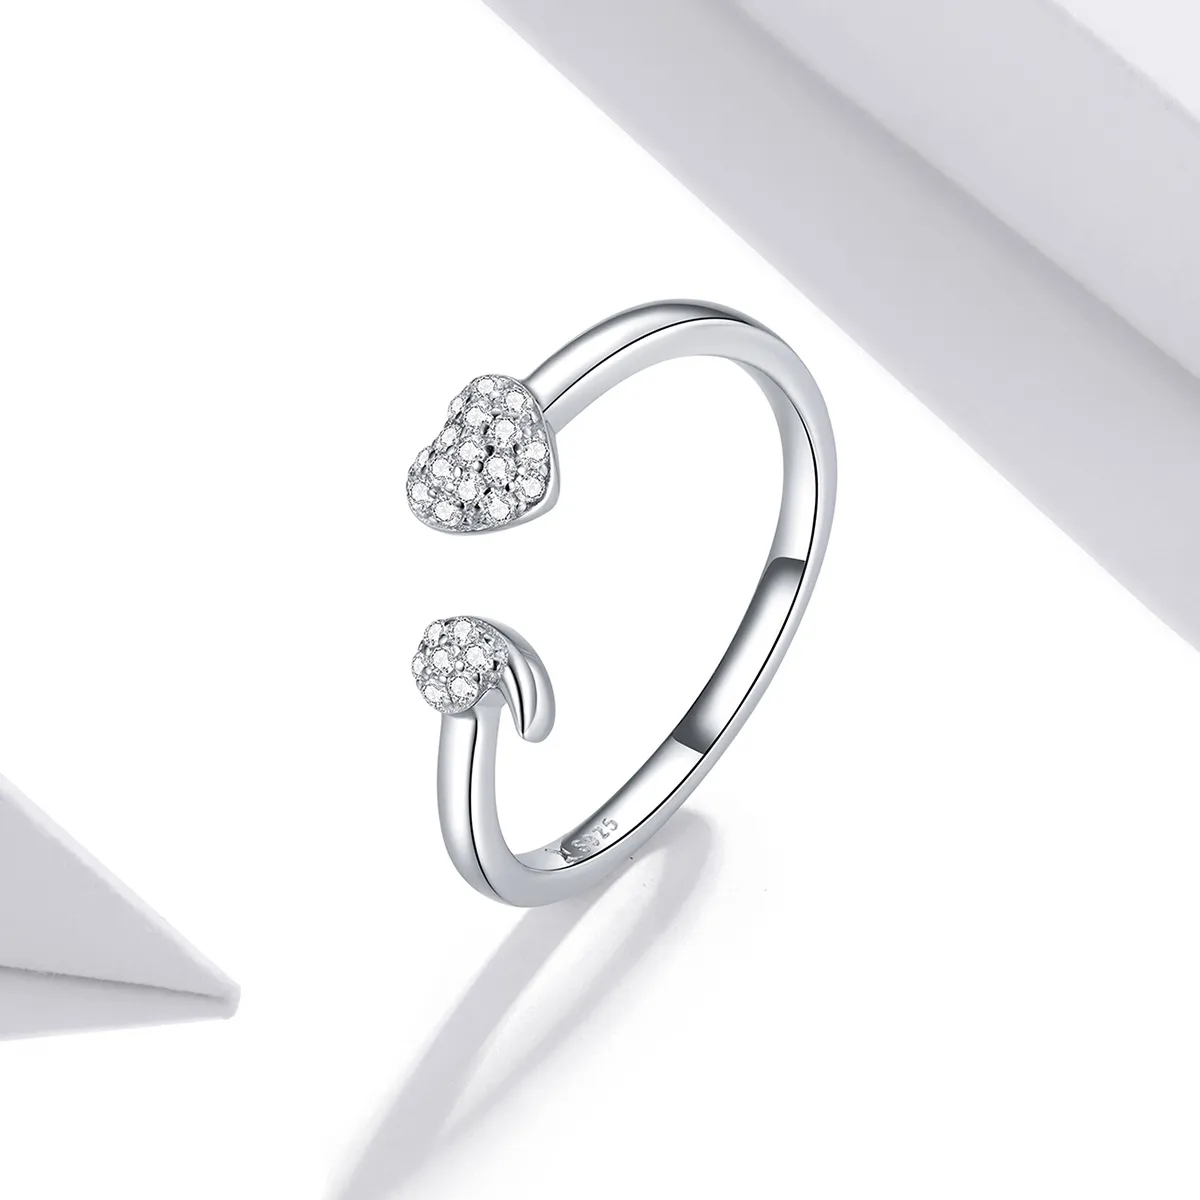 Pandora Style Silver Affiliated Open Ring - SCR706